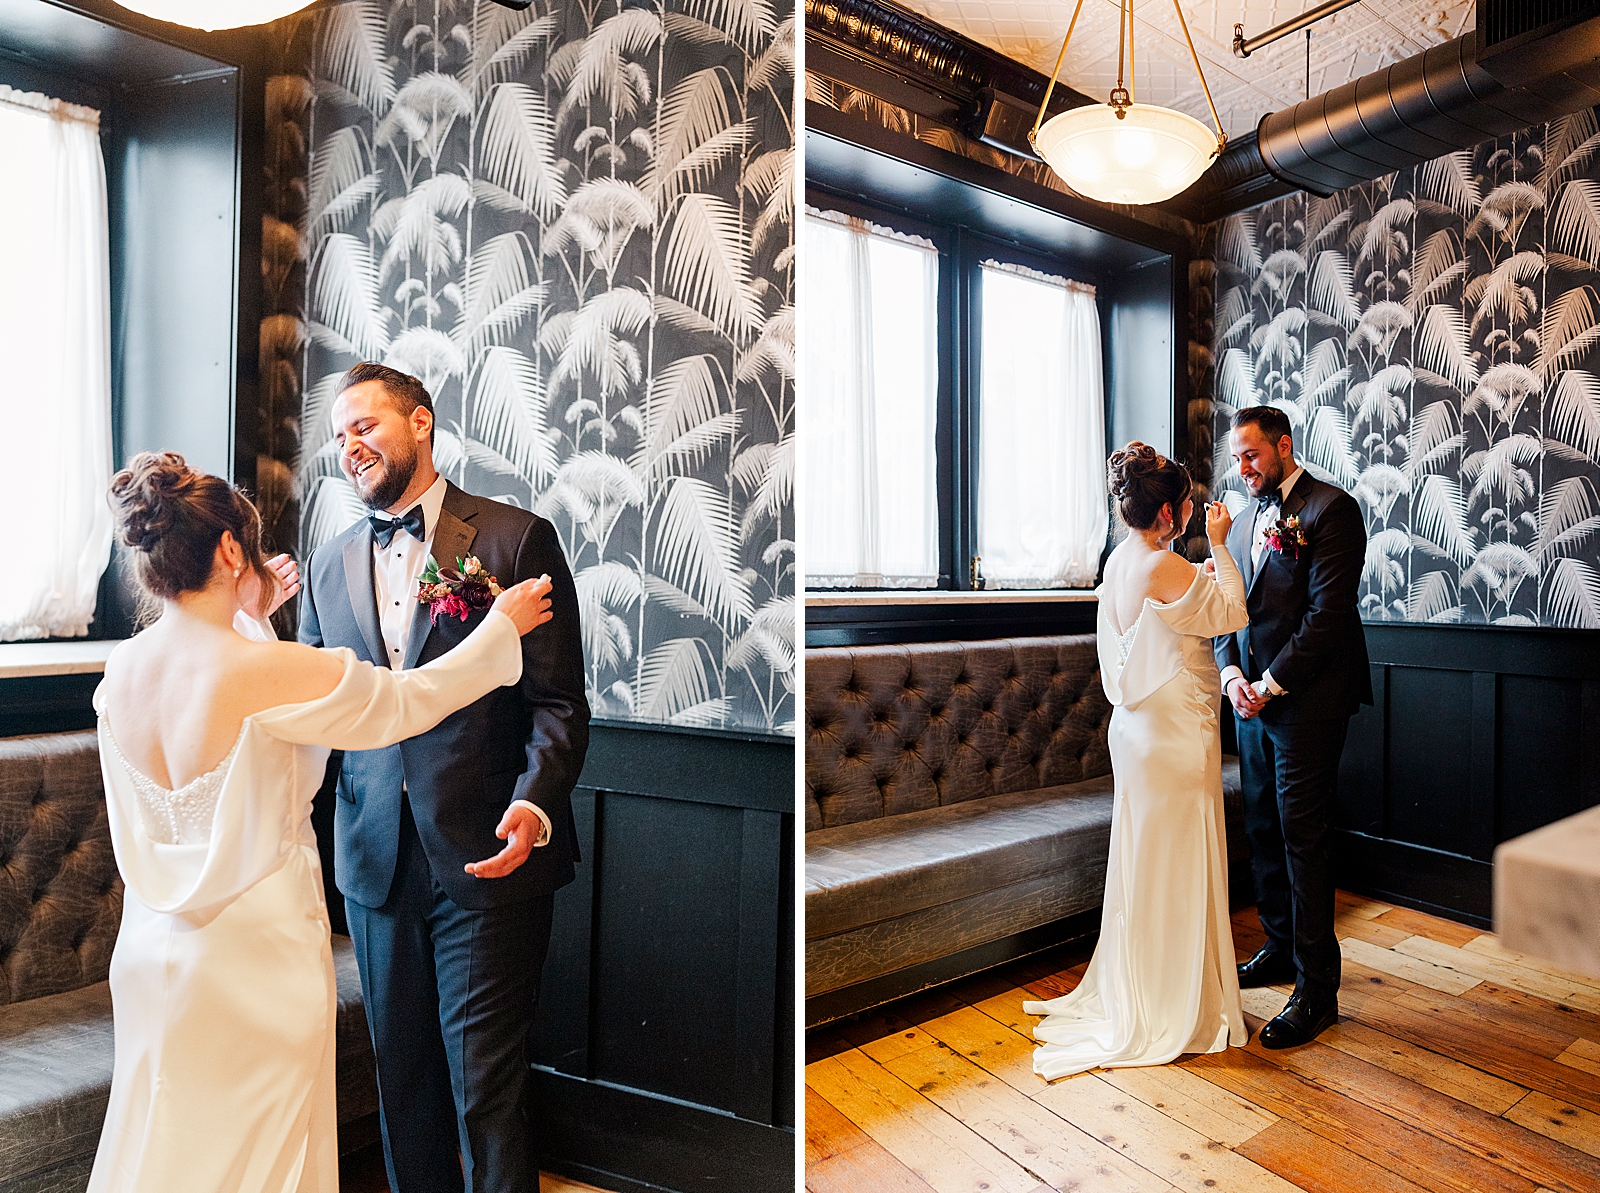 Left photo: Shot of the groom seeing the bride for the first time during their first look.
Right photo: Shot of the bride and groom getting emotional during their first look. 